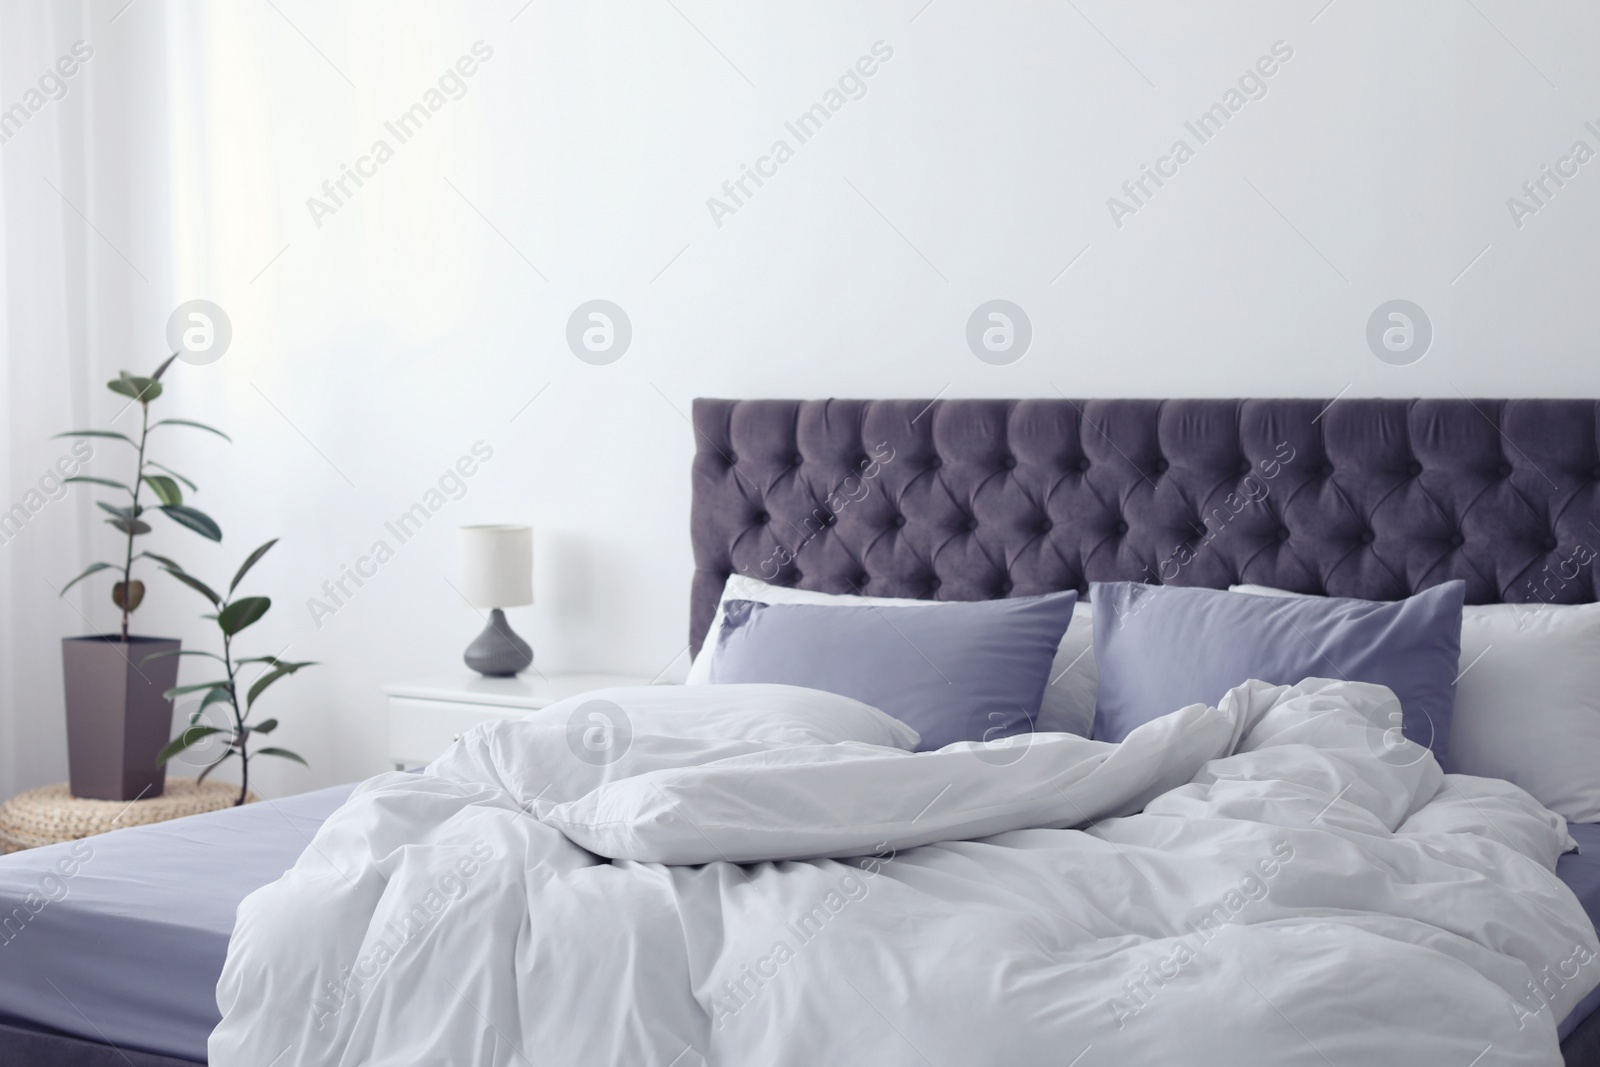 Photo of Modern bed with crumpled blanket and pillows indoors